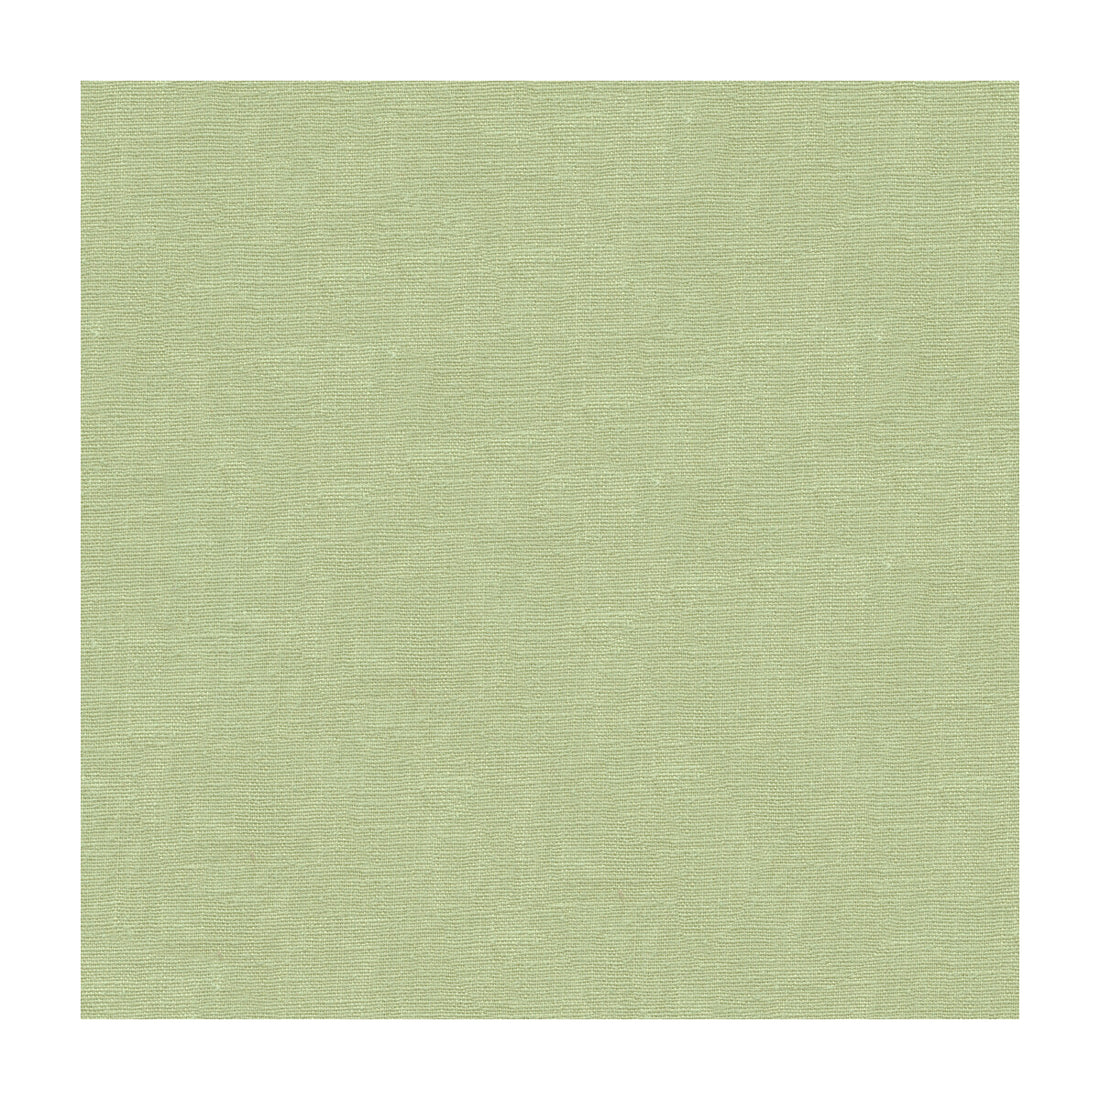 Dublin fabric in jade color - pattern 32344.130.0 - by Kravet Basics in the Perfect Plains collection